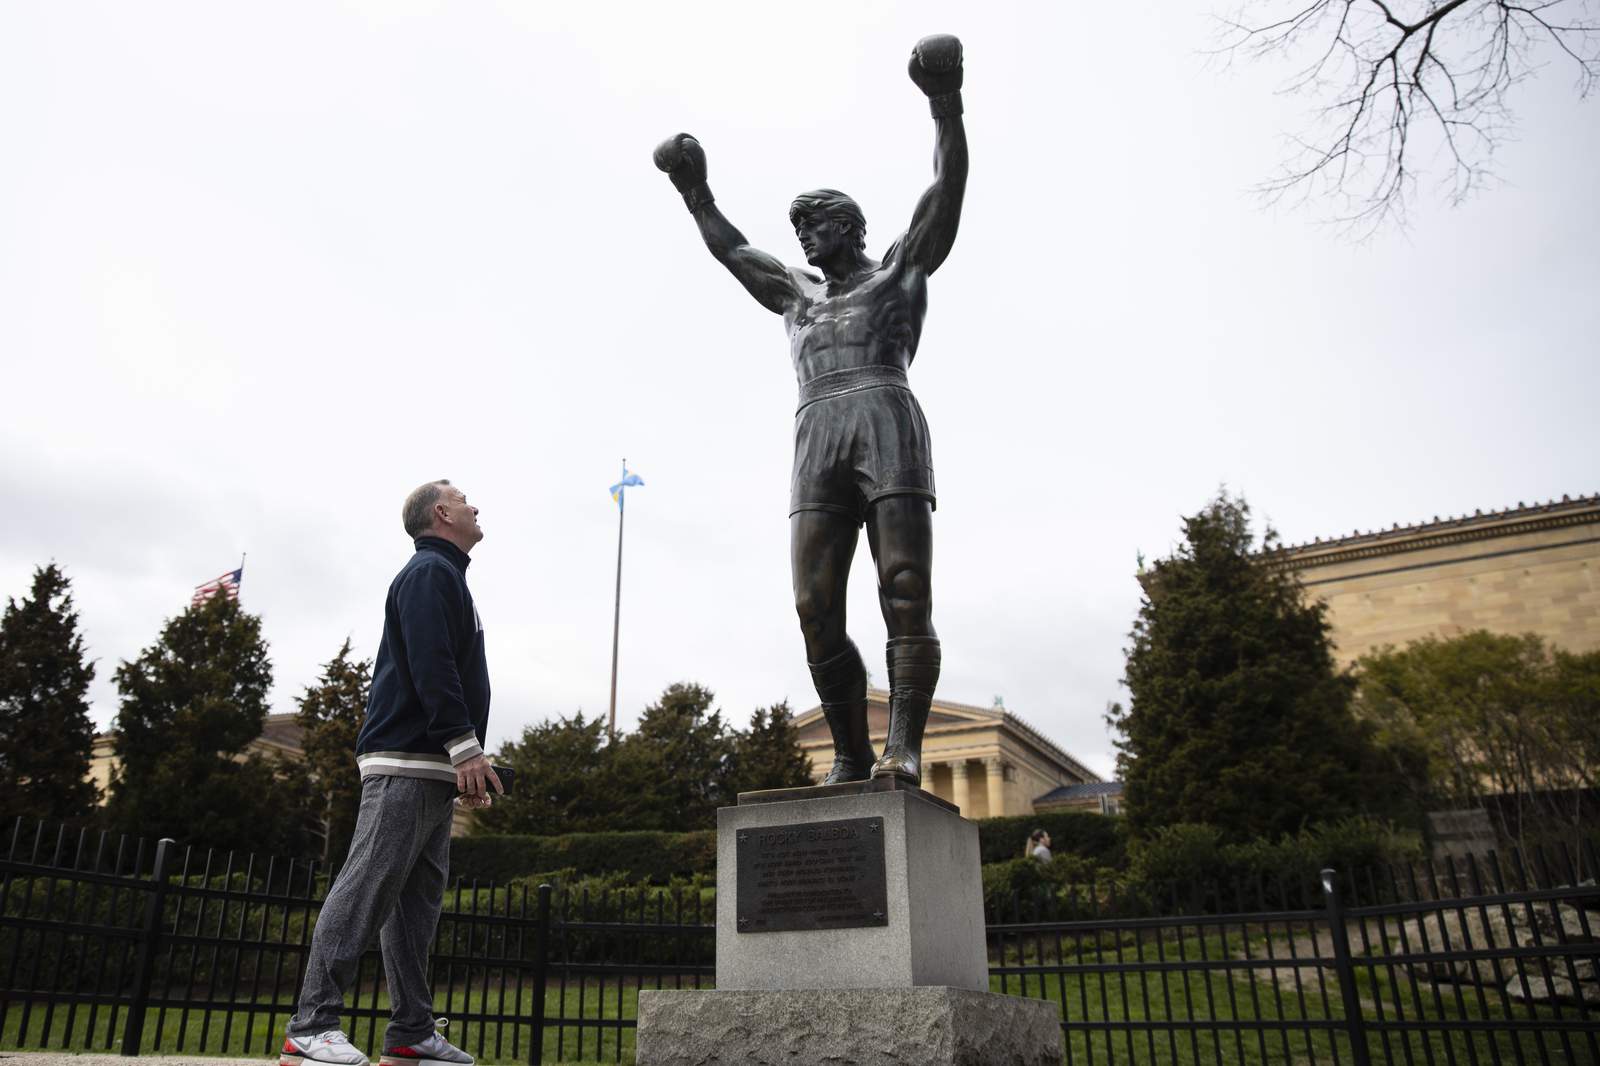 Yo, Adrian! 'Rocky' still packs a punch as Philly favorite